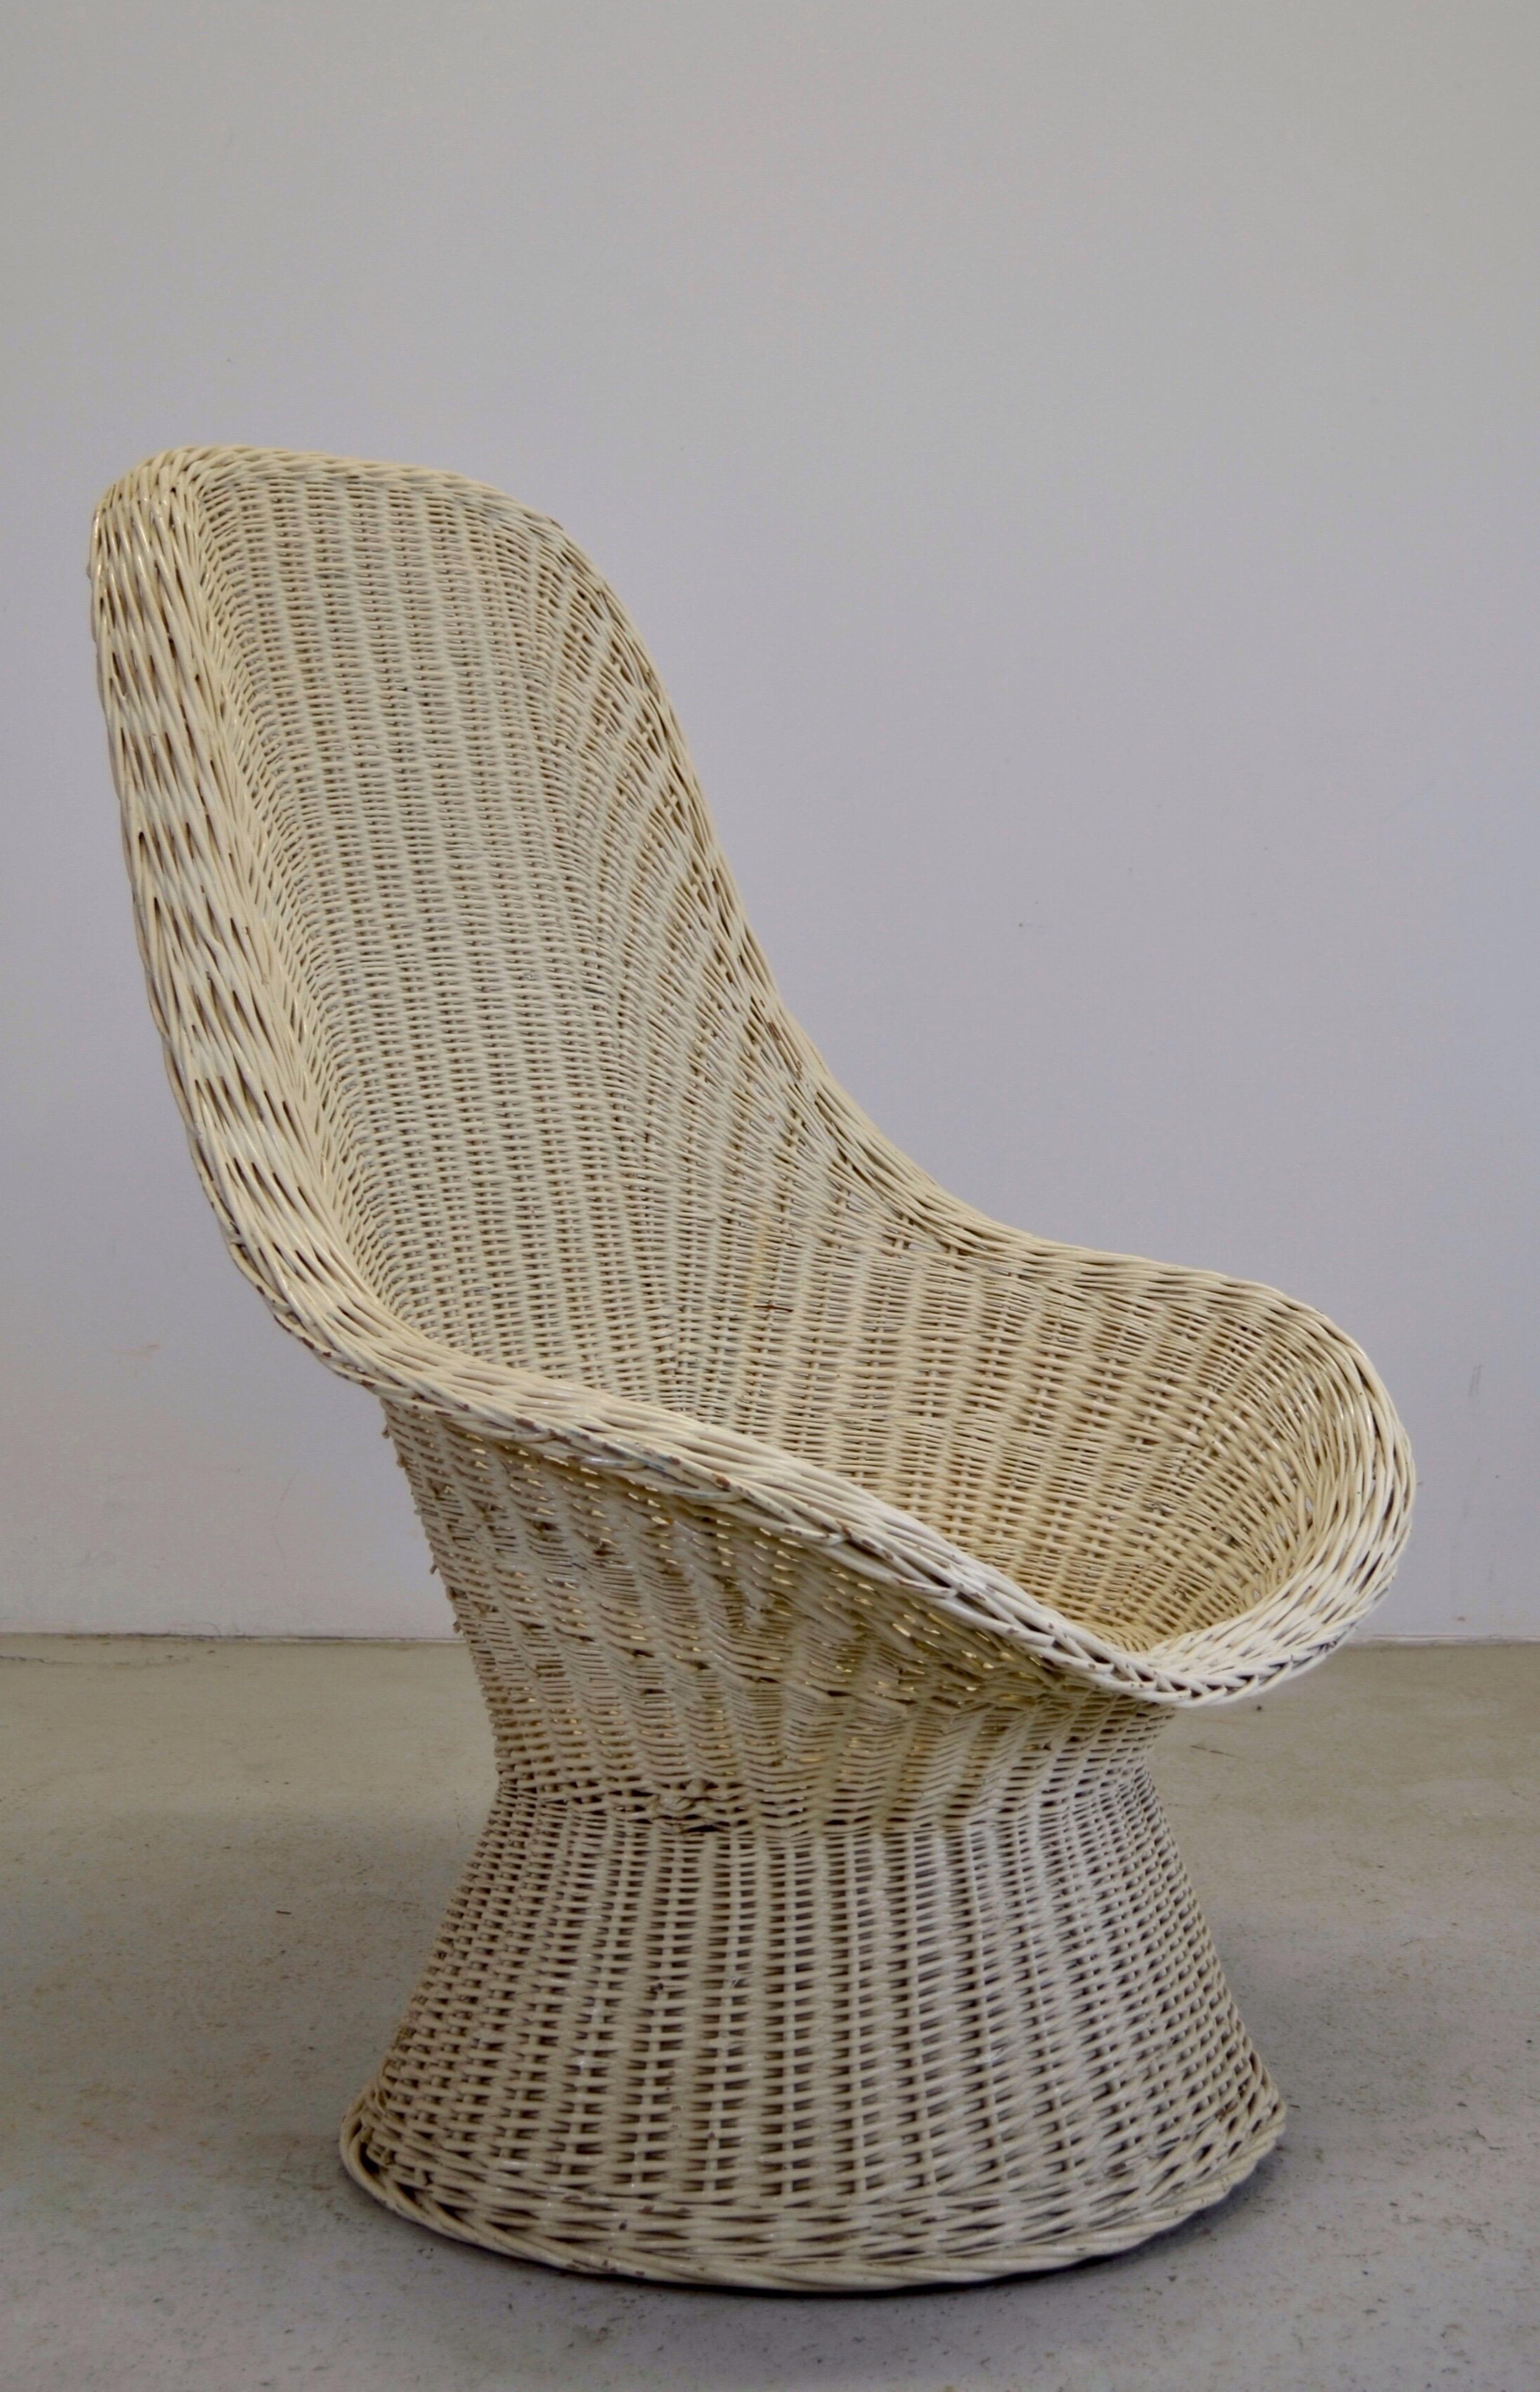 A woven rattan armchair, white lacquered, both understated and elegant. Inspired by the clean style of Egon Eiermann, this armchair combines comfort and beauty in a timeless design.

Its minimalist appearance will add a touch of refinement to your